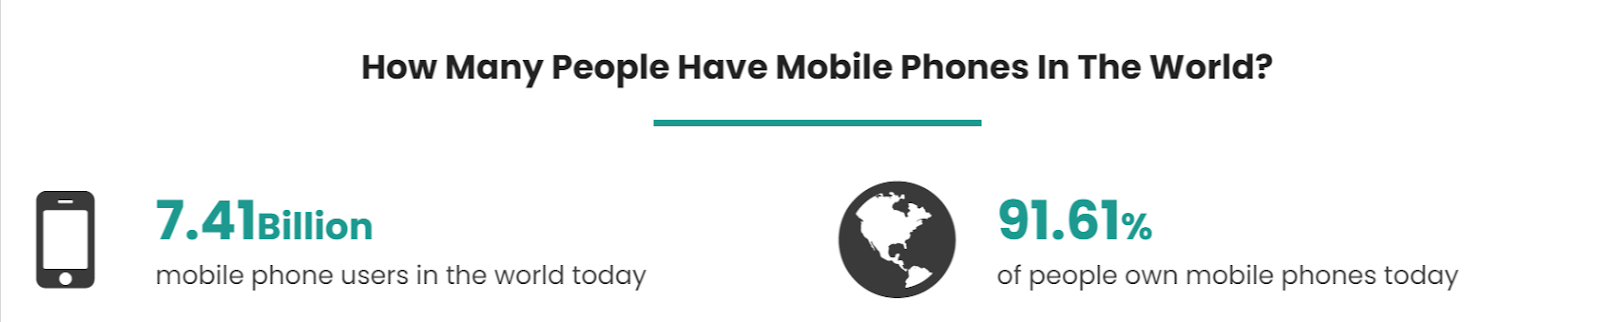 prebid - how many people have mobile phones in the world 